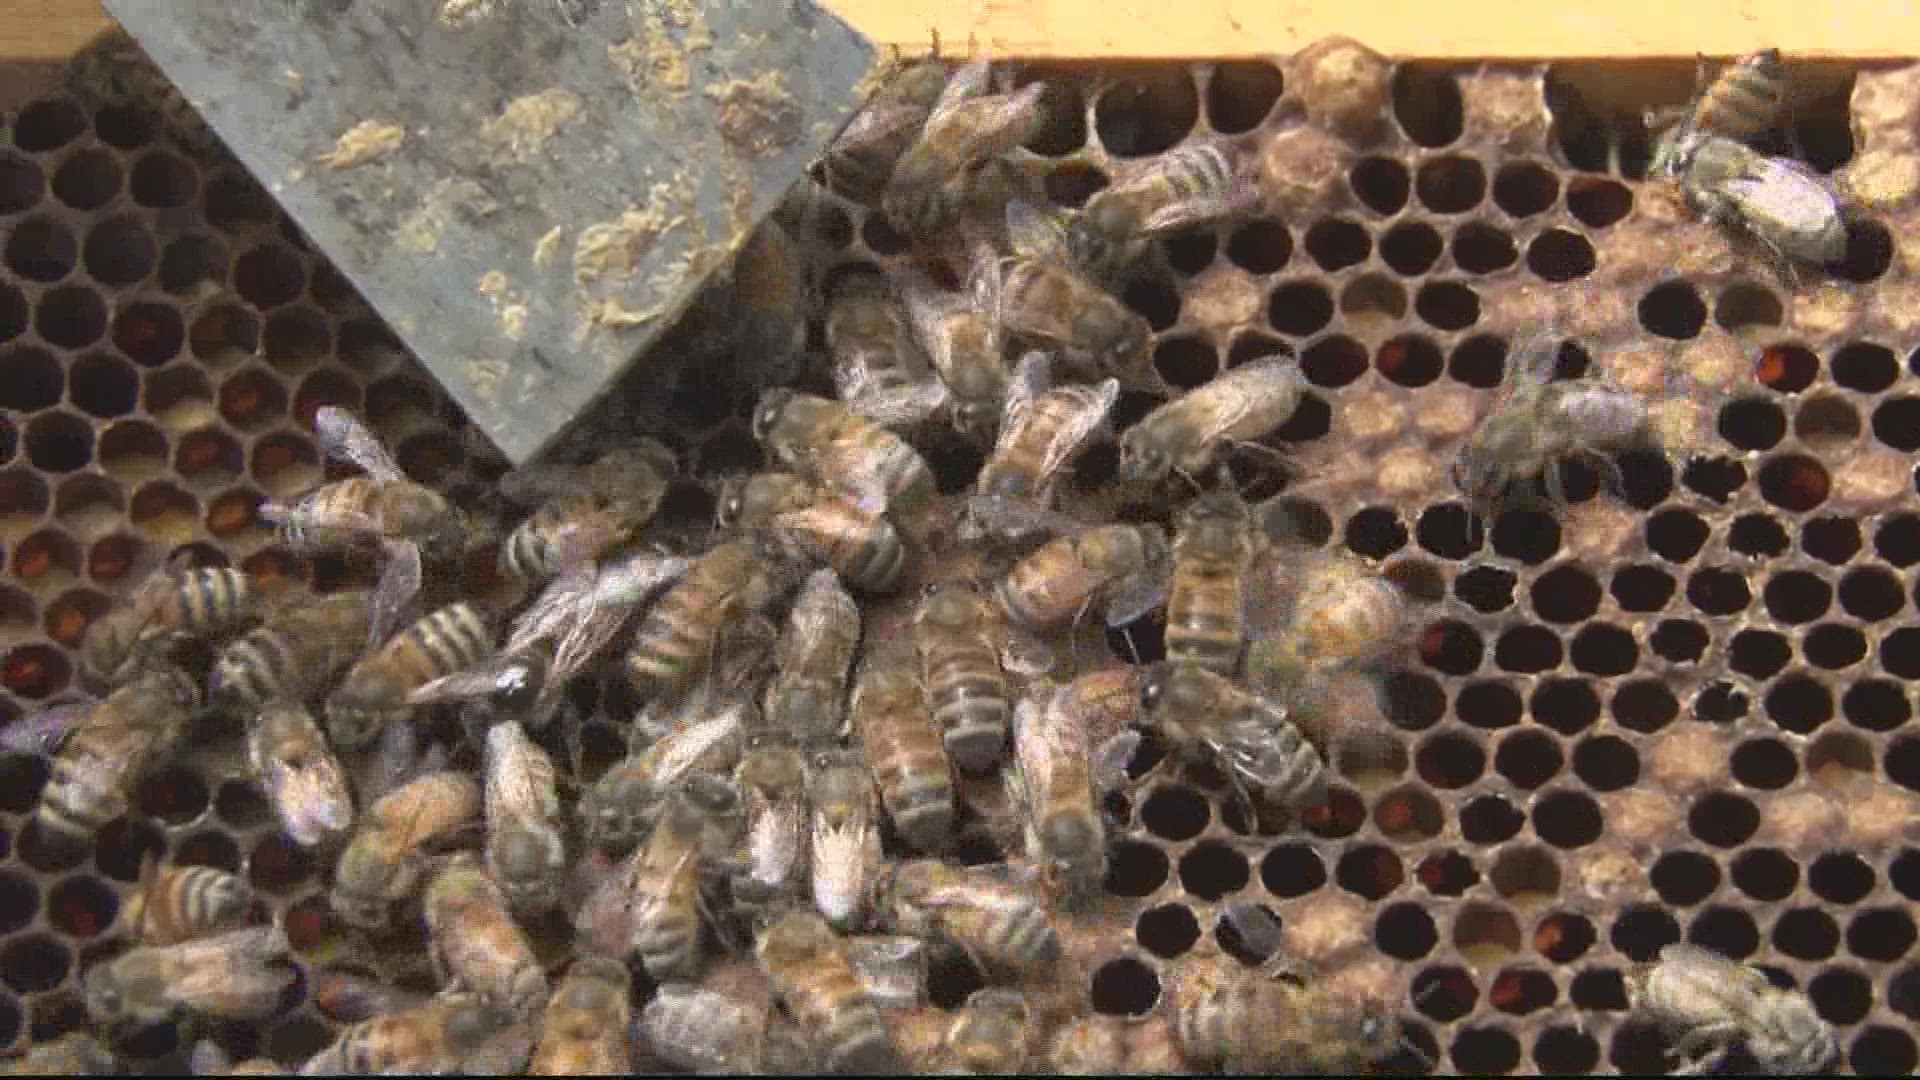 Maryland and Virginia beekeepers have tips to be more pollinator friendly.